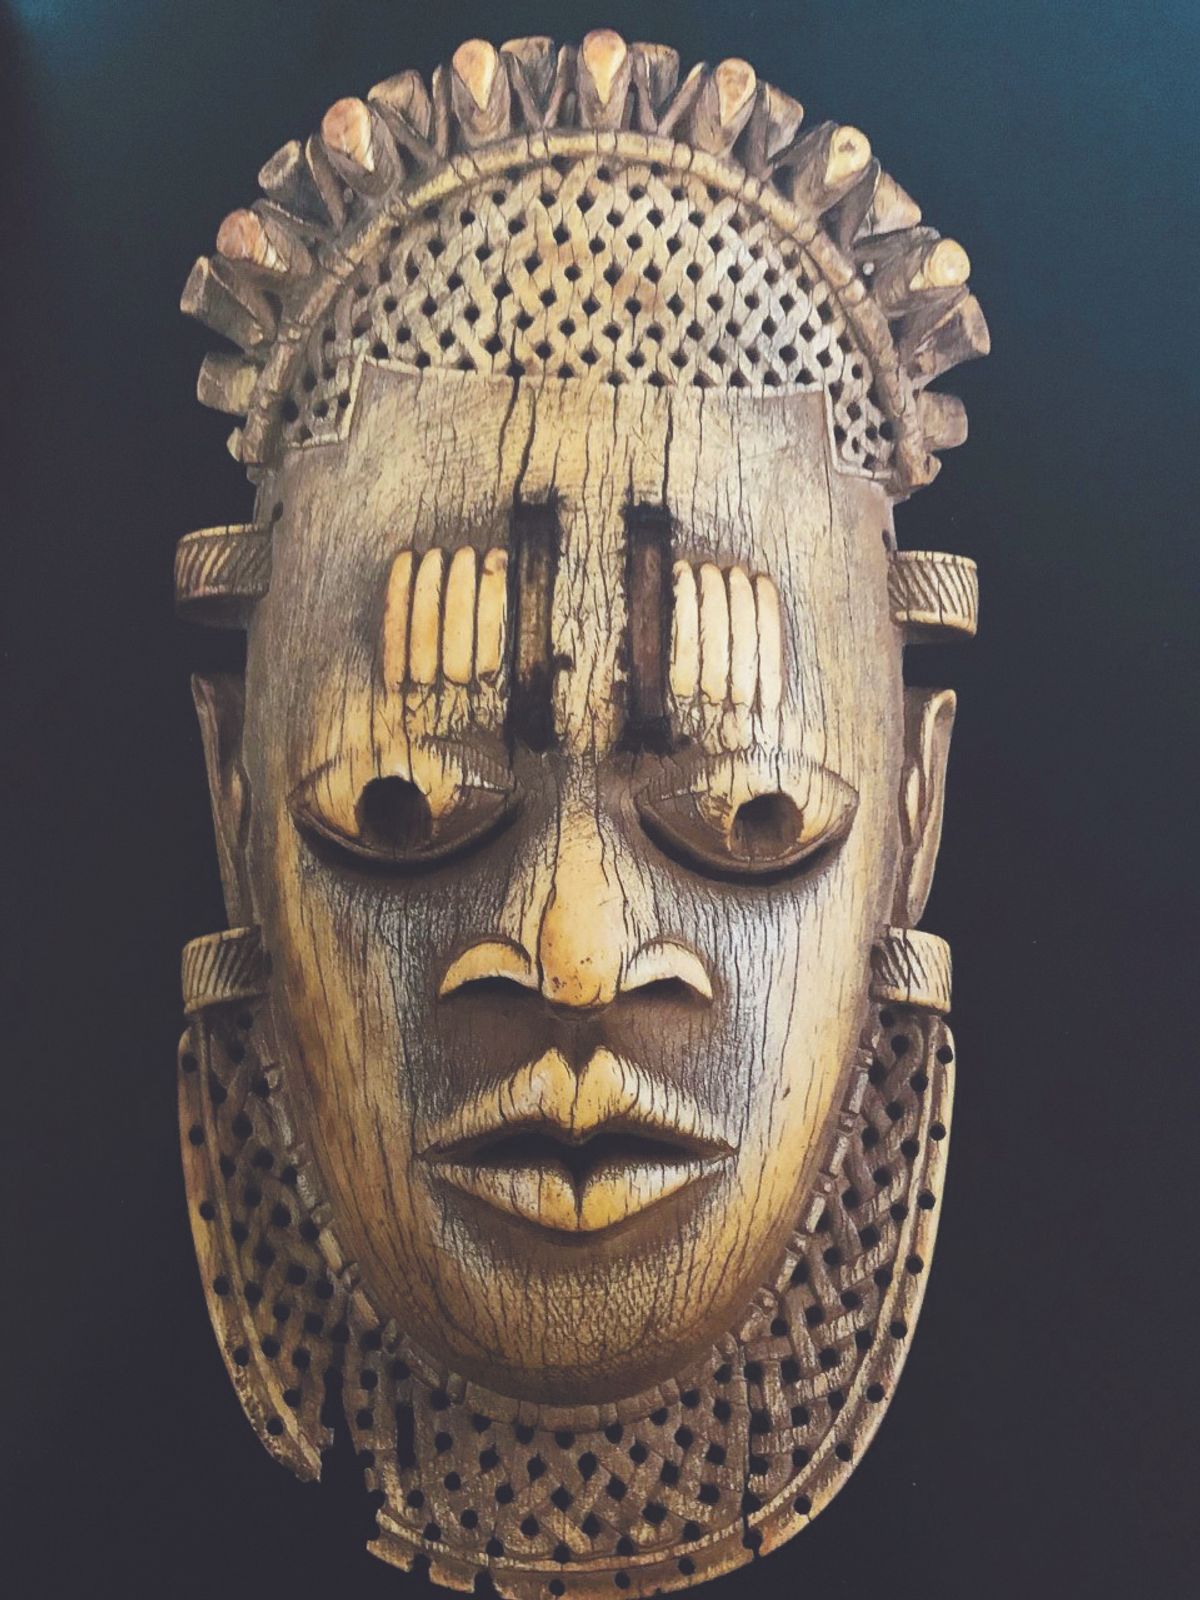 This rare ivory mask, now in the Al-Thani collection in Paris, is one of five similar ivory hip pendants produced for the ceremonial use of the Oba, the ruler of the Edo people. It is thought to represent Idia, mother of Oba Esigie, who ruled in the 16th century. All five known ivory masks were found together in the Oba’s bedchamber by the British when they sacked Benin City in 1897

Courtesy of Sotheby's